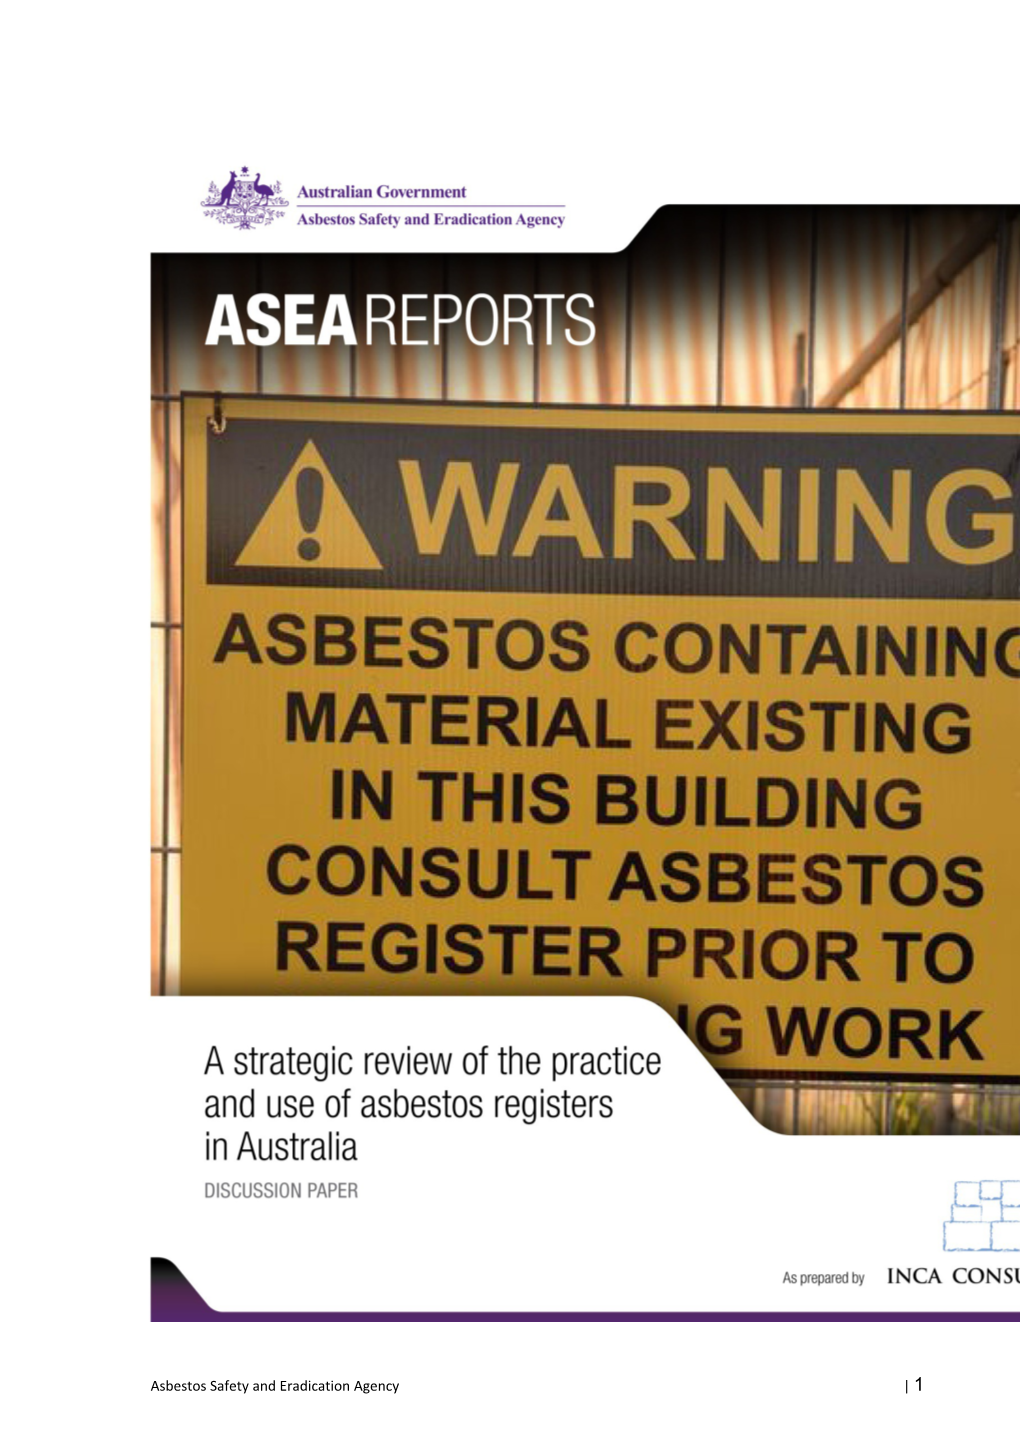 A Stratgic Review of the Practice and Use of Asbestos Registers in Australia Discussion Paper